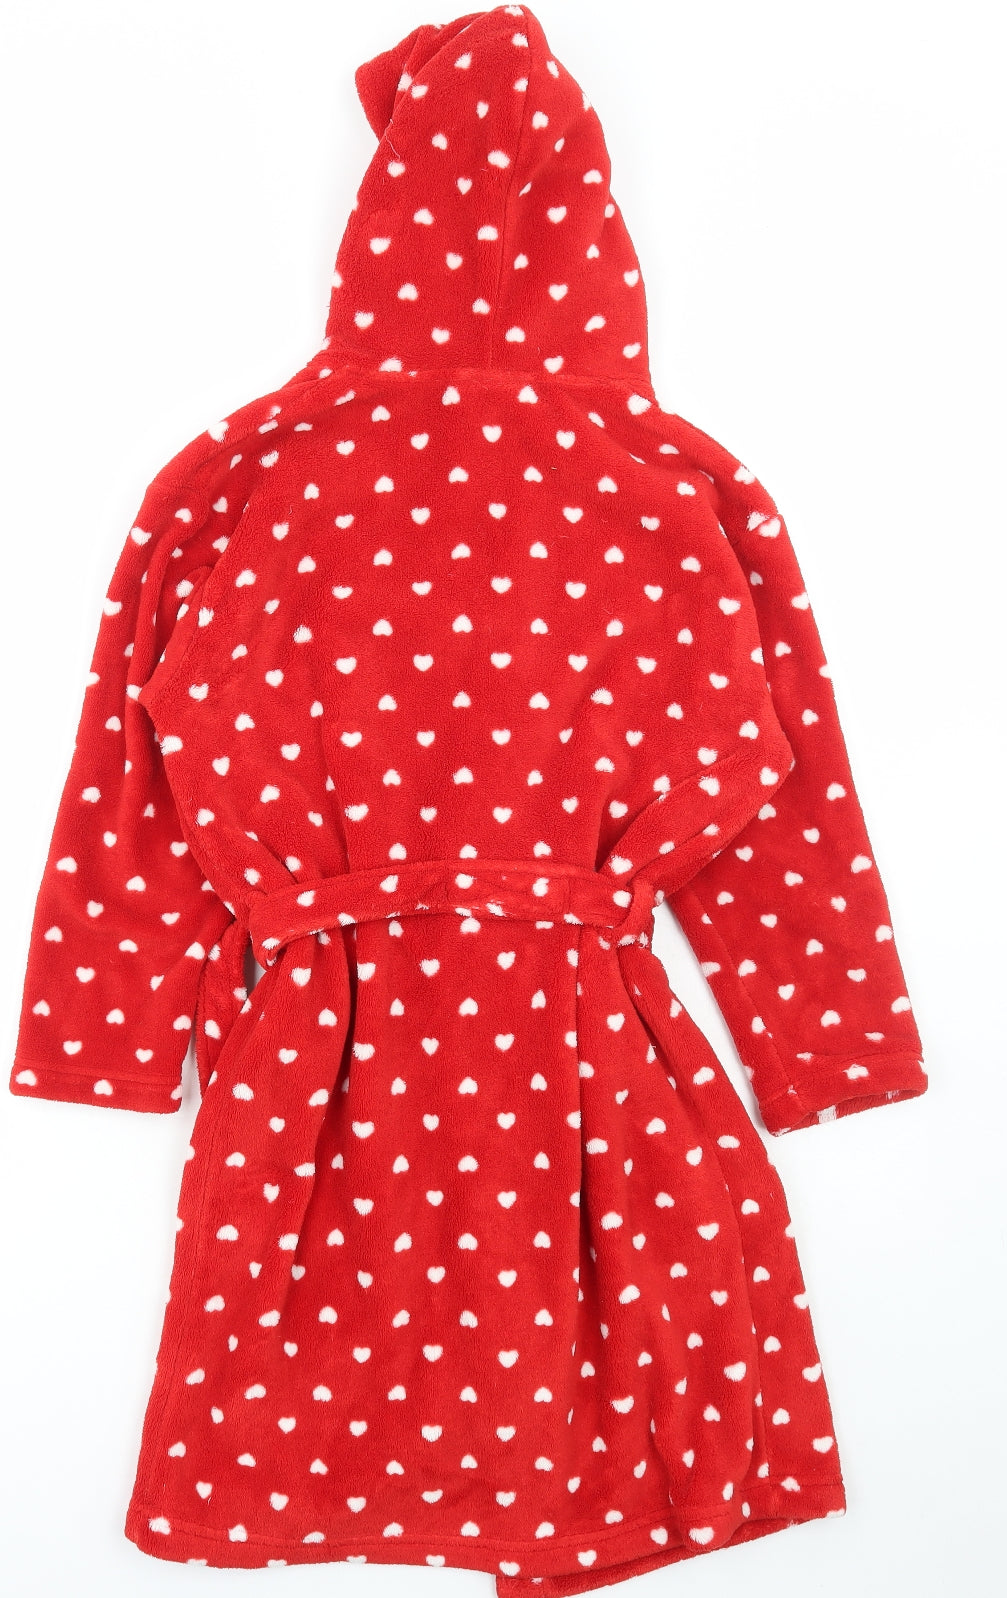 NEXT Girls Red Polka Dot Polyester Robe Size 9-10 Years Tie